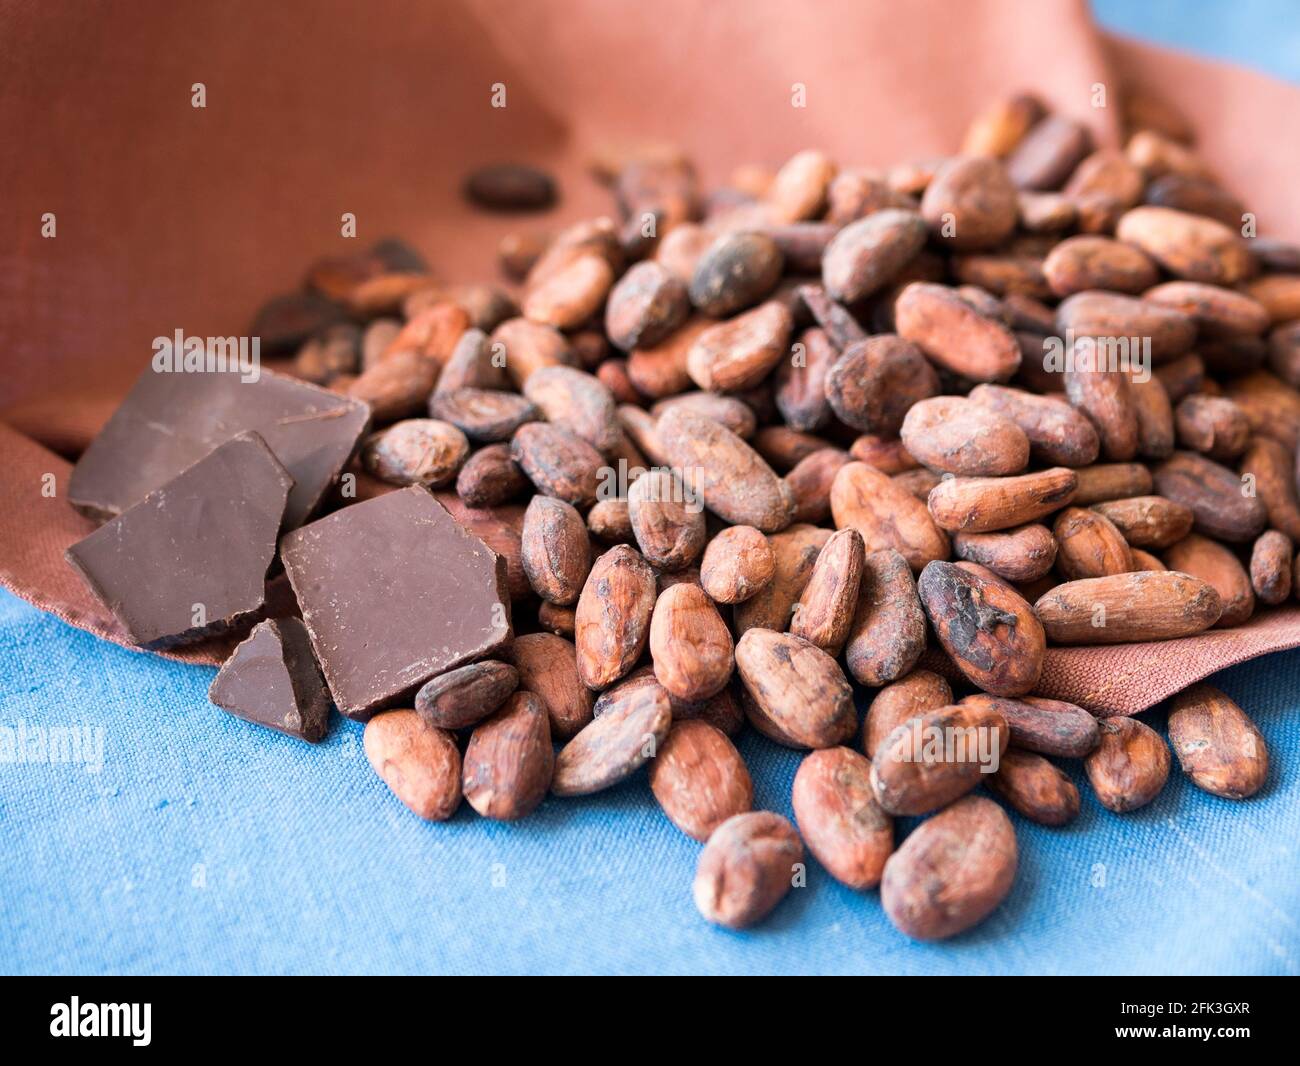 Raw cacao beans and chocolate bar. Natural antidepressant and a super food Stock Photo